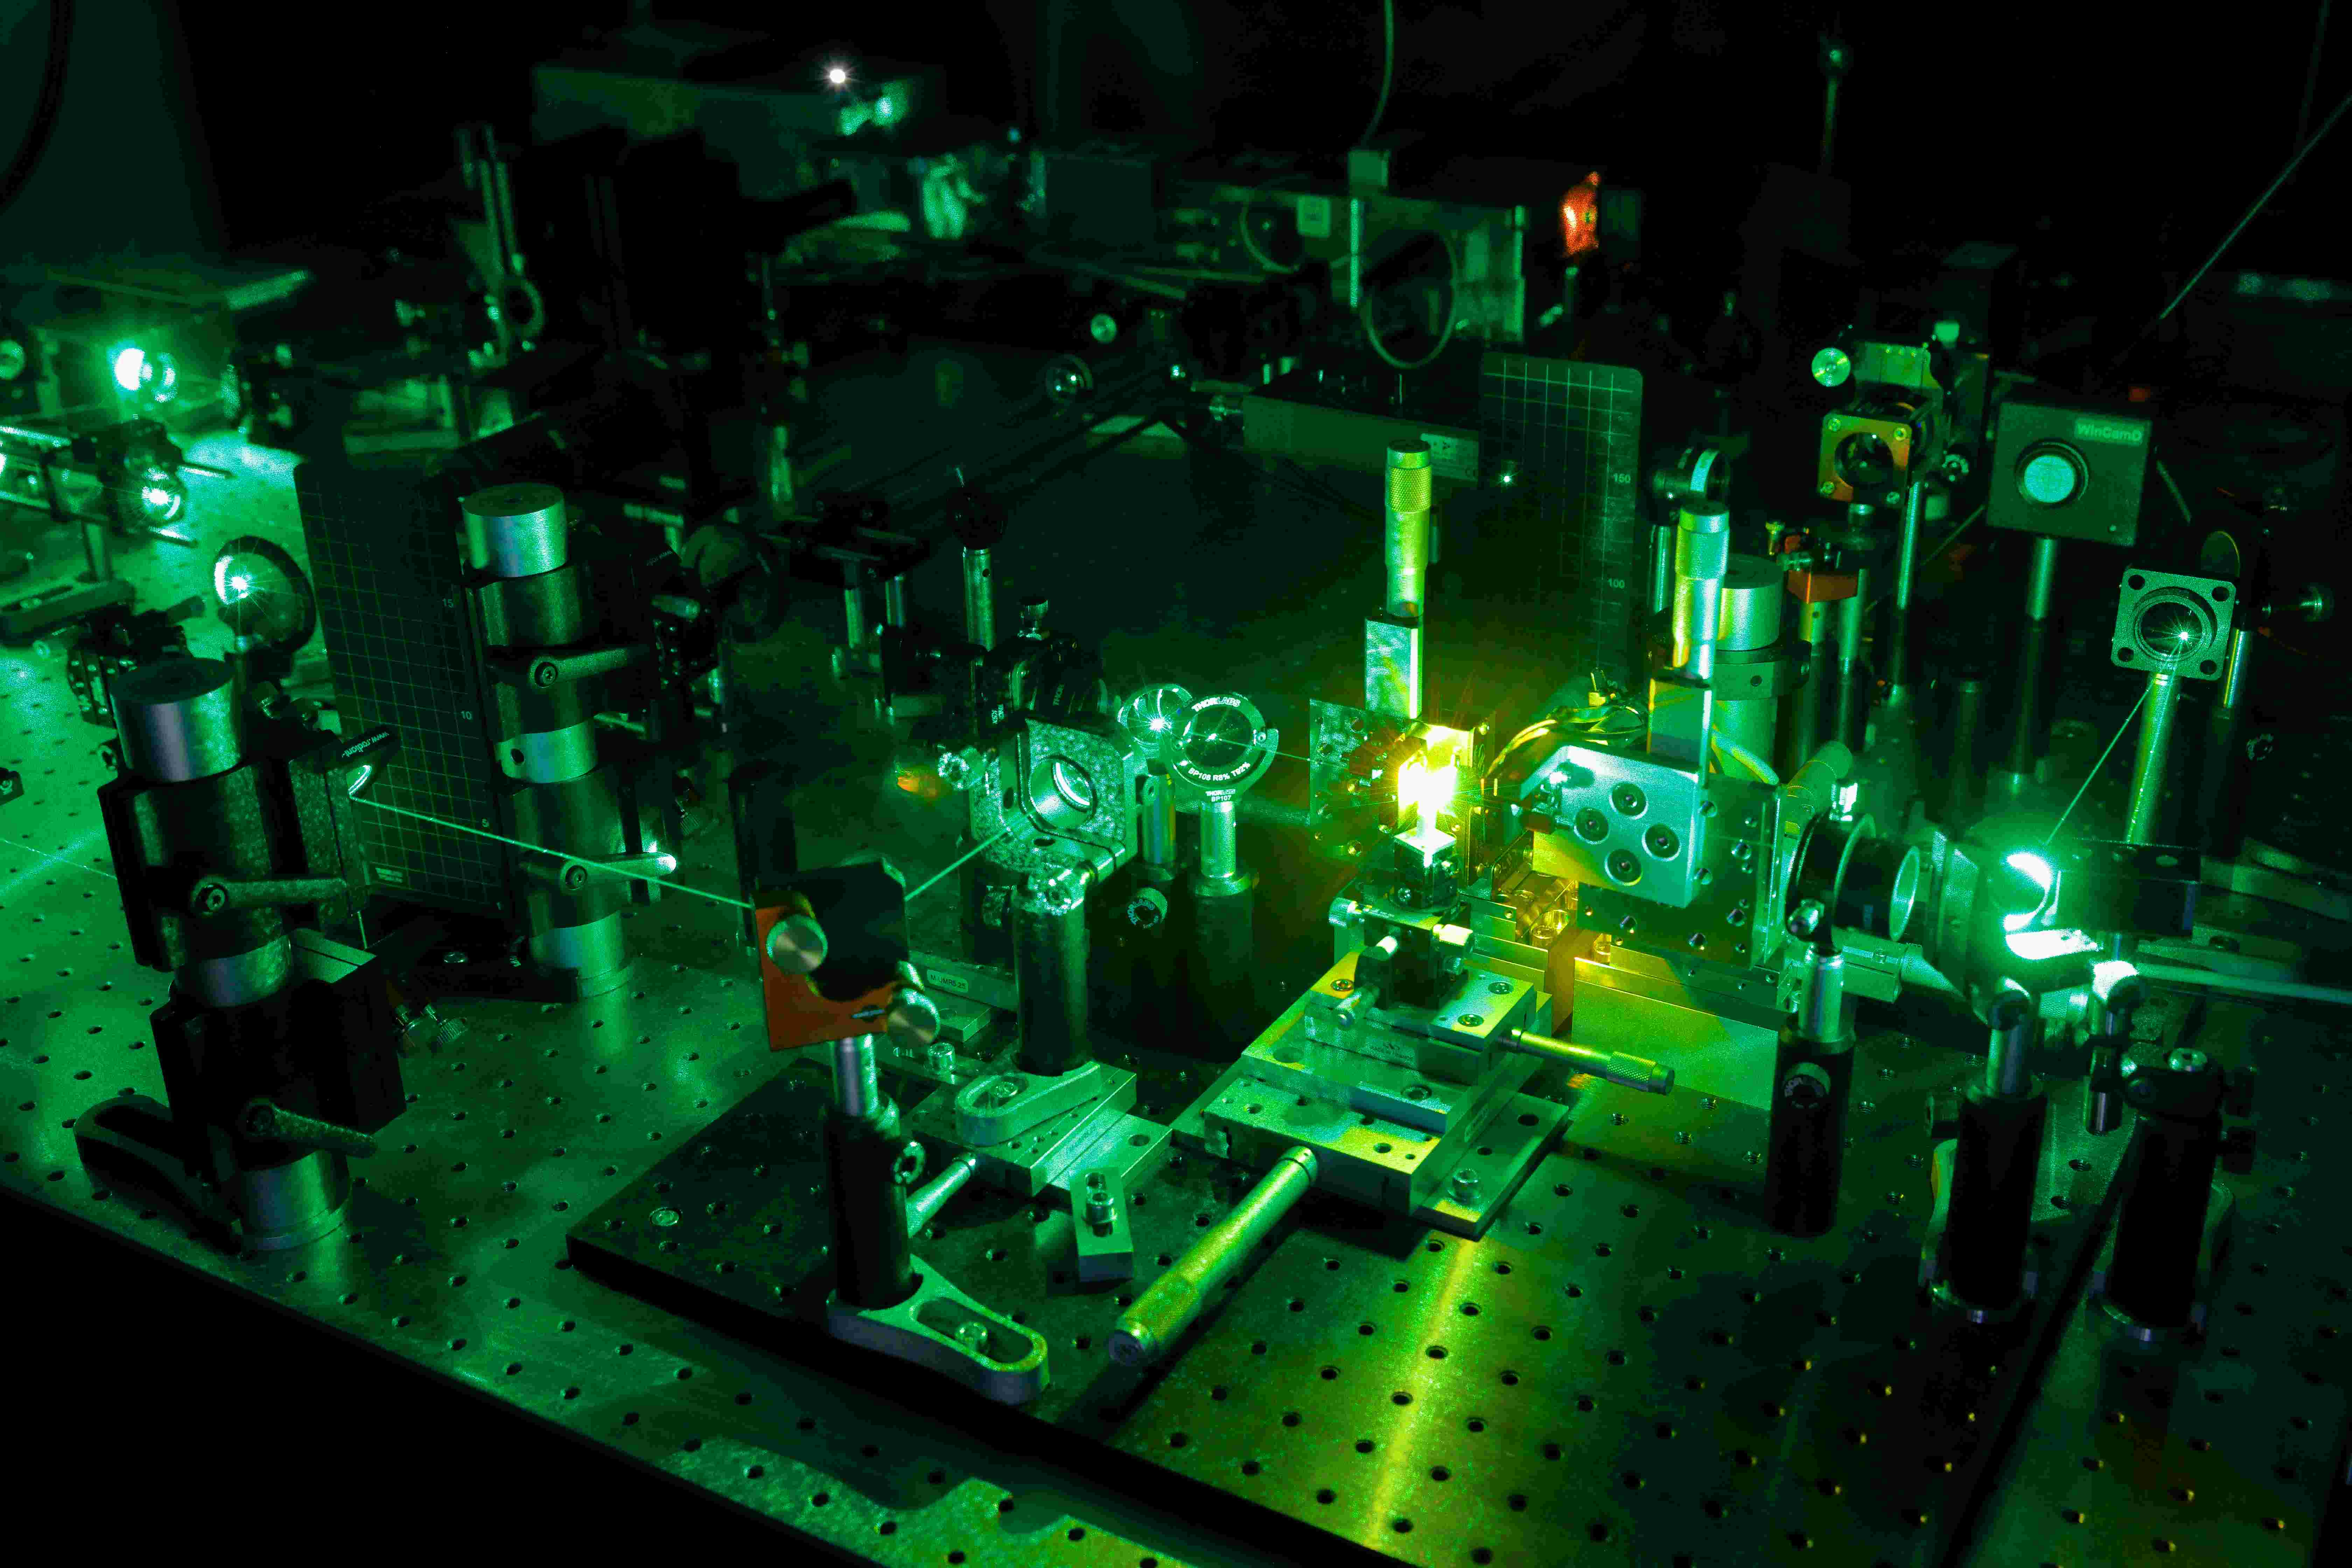 Laboratory set-up in which a green laser beam falls through various instruments.